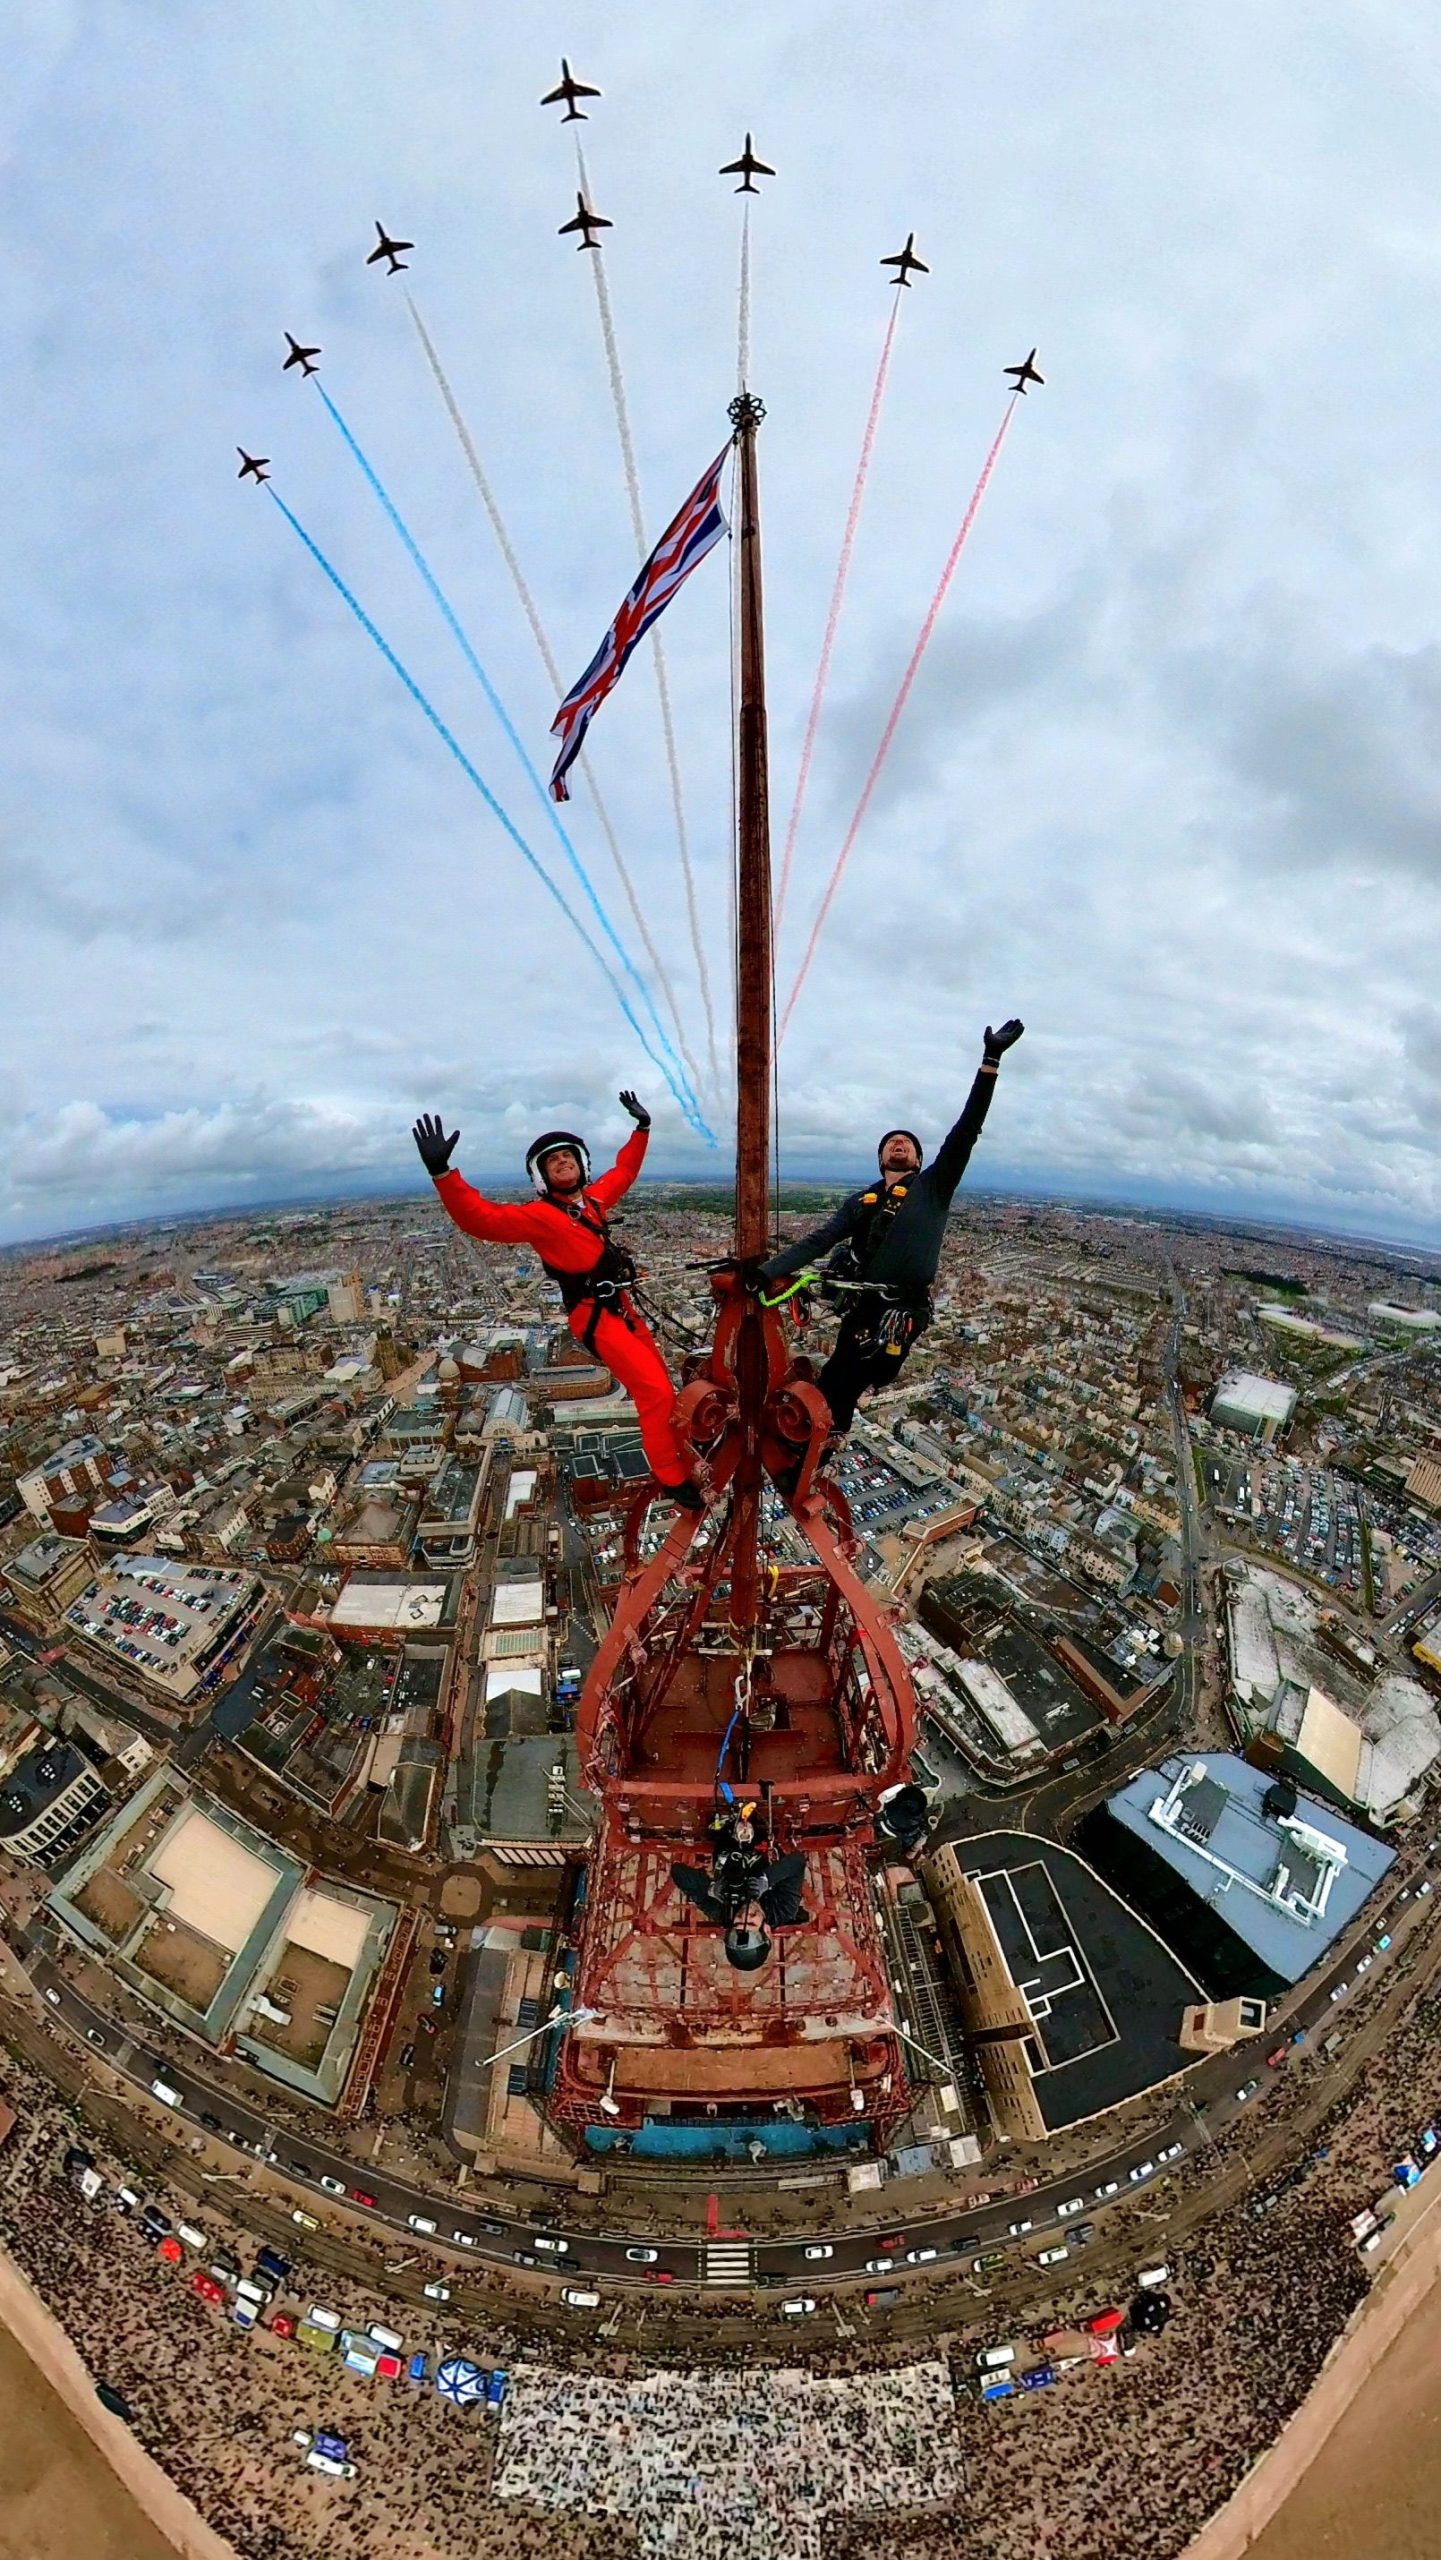 Arco captures stunning Red Arrows imagery atop Blackpool Tower